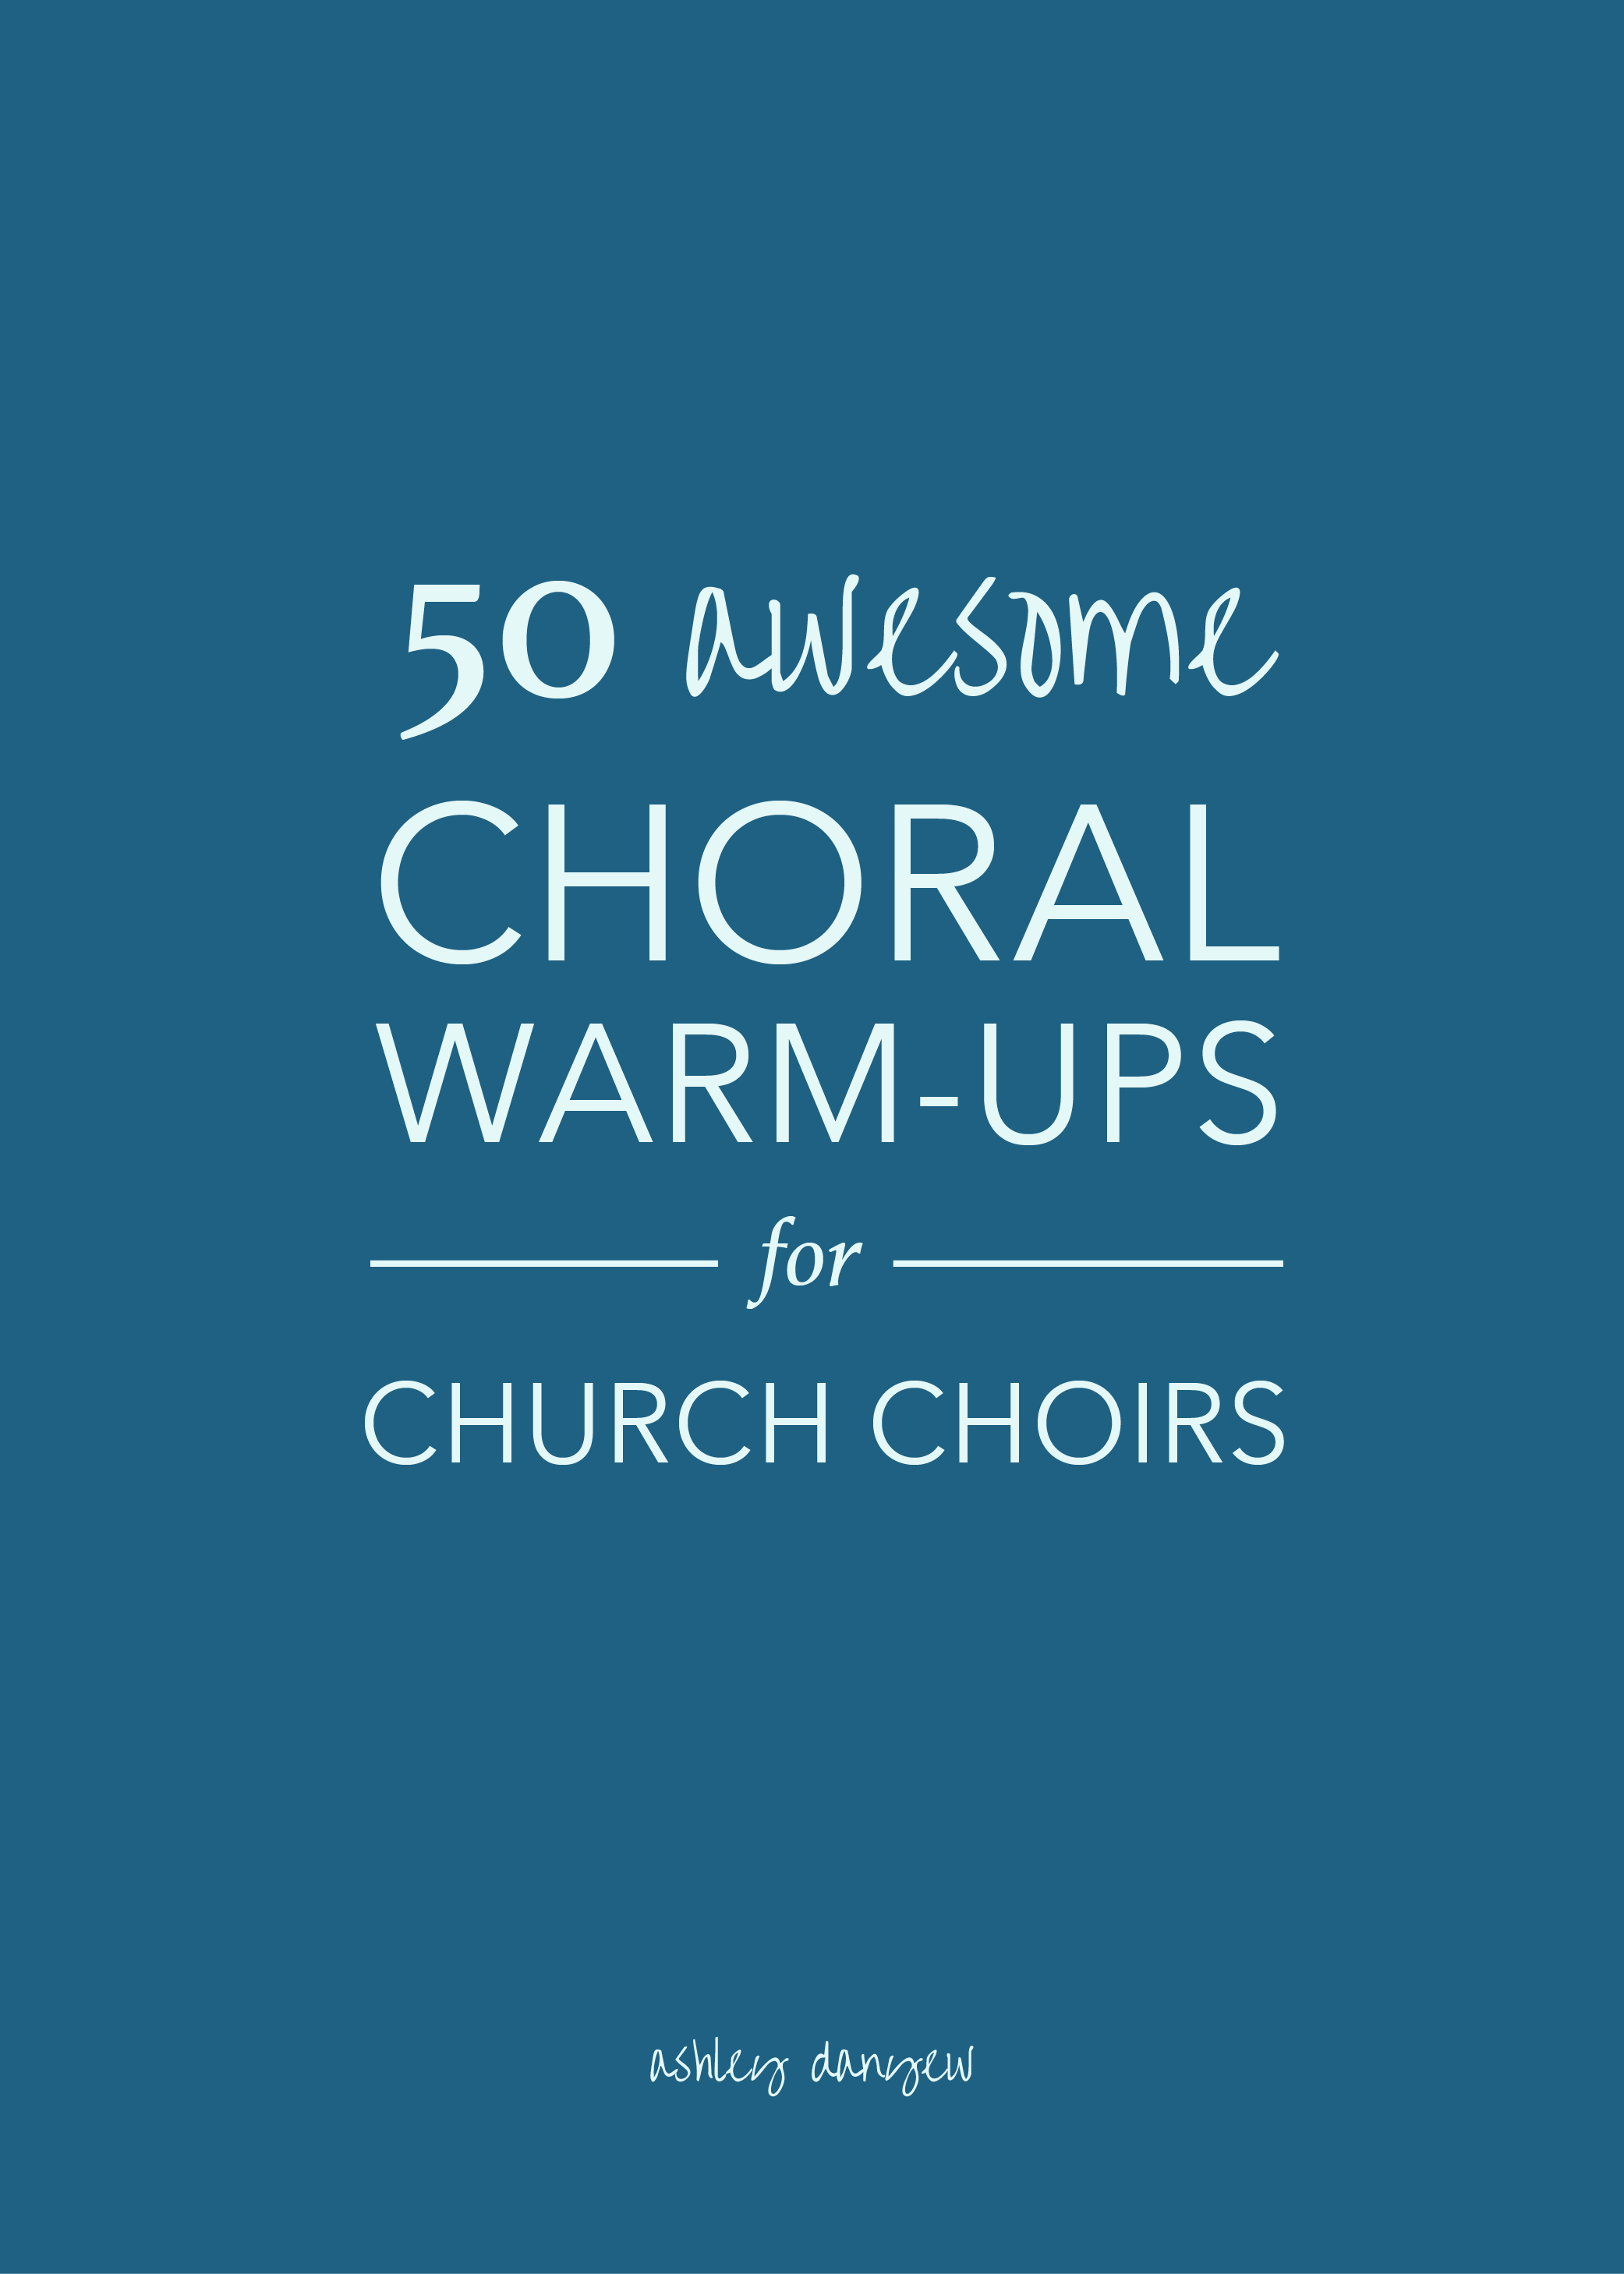 50 Awesome Choral Warm-Ups for Church Choirs-01.png